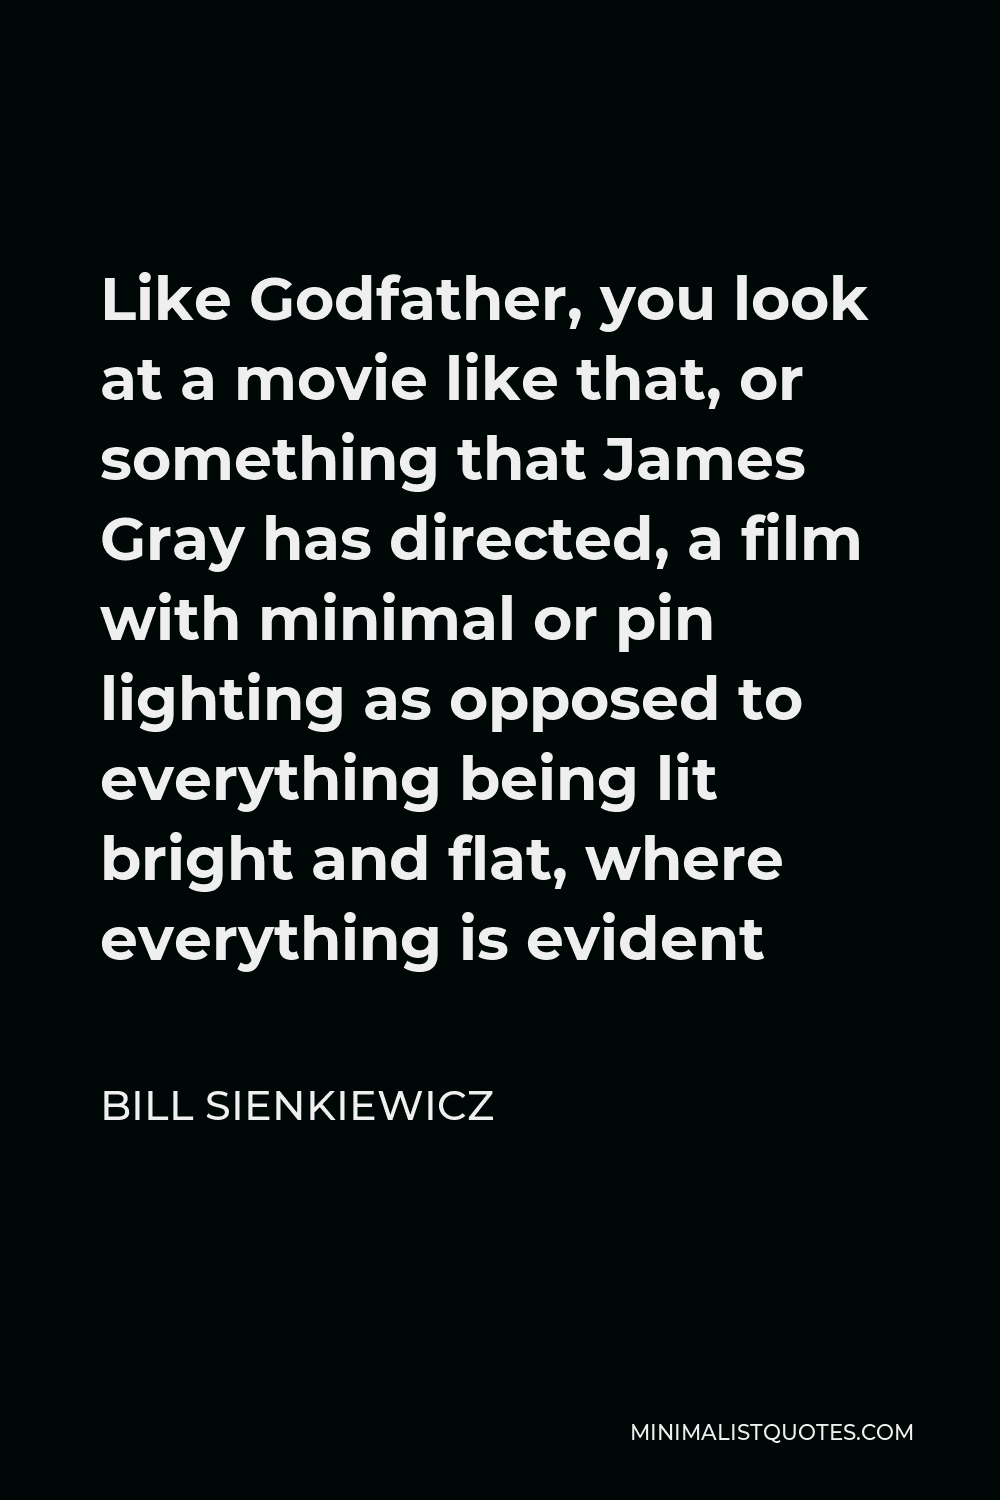 Bill Sienkiewicz Quote - Like Godfather, you look at a movie like that, or something that James Gray has directed, a film with minimal or pin lighting as opposed to everything being lit bright and flat, where everything is evident